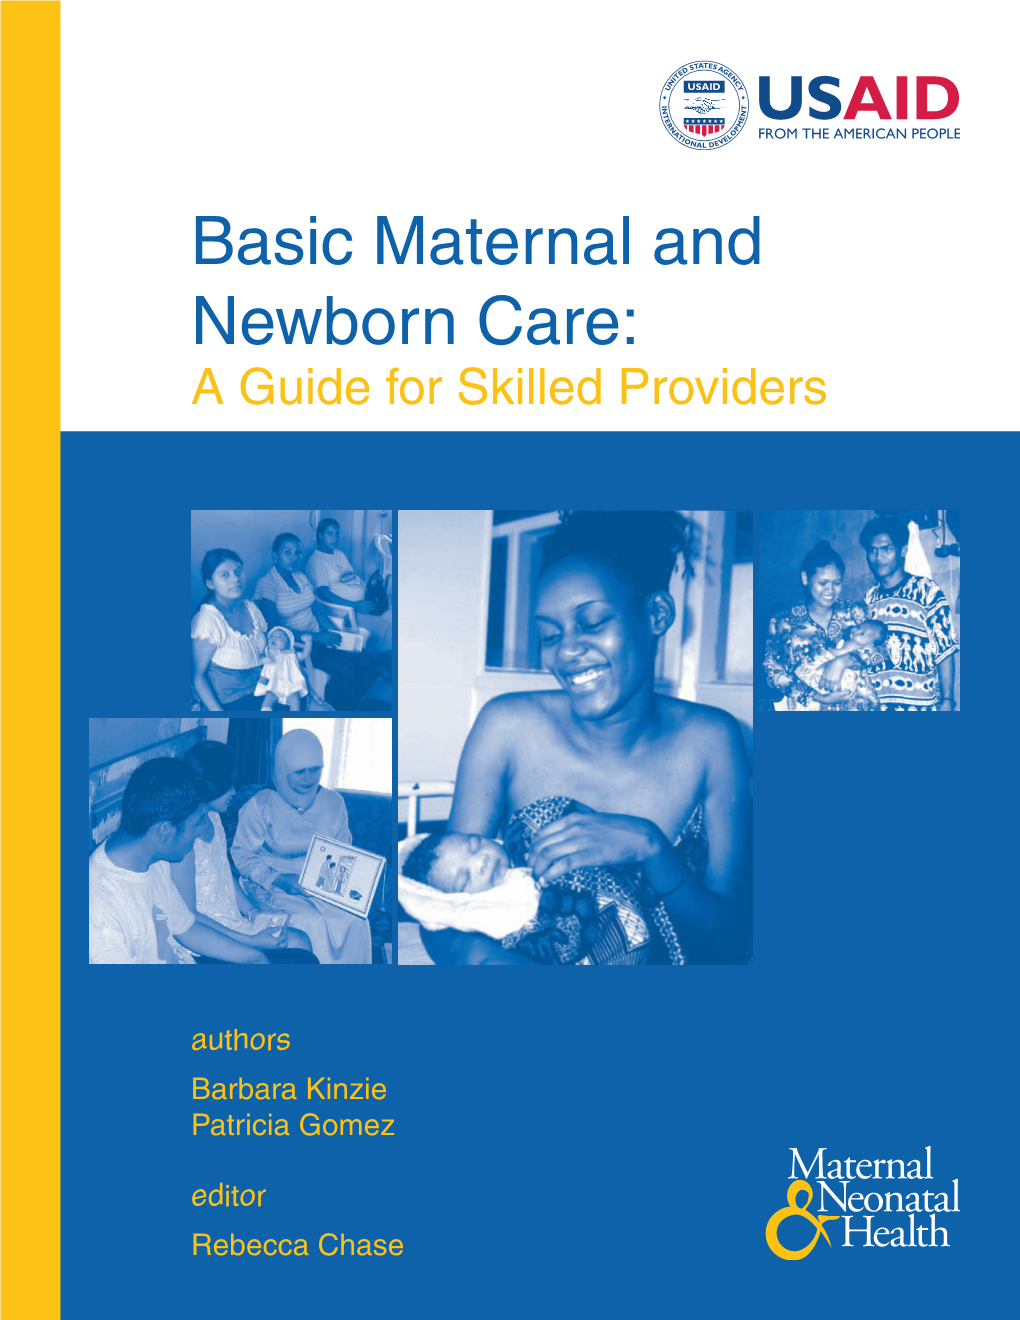 Basic Maternal and Newborn Care: a Guide for Skilled Providers